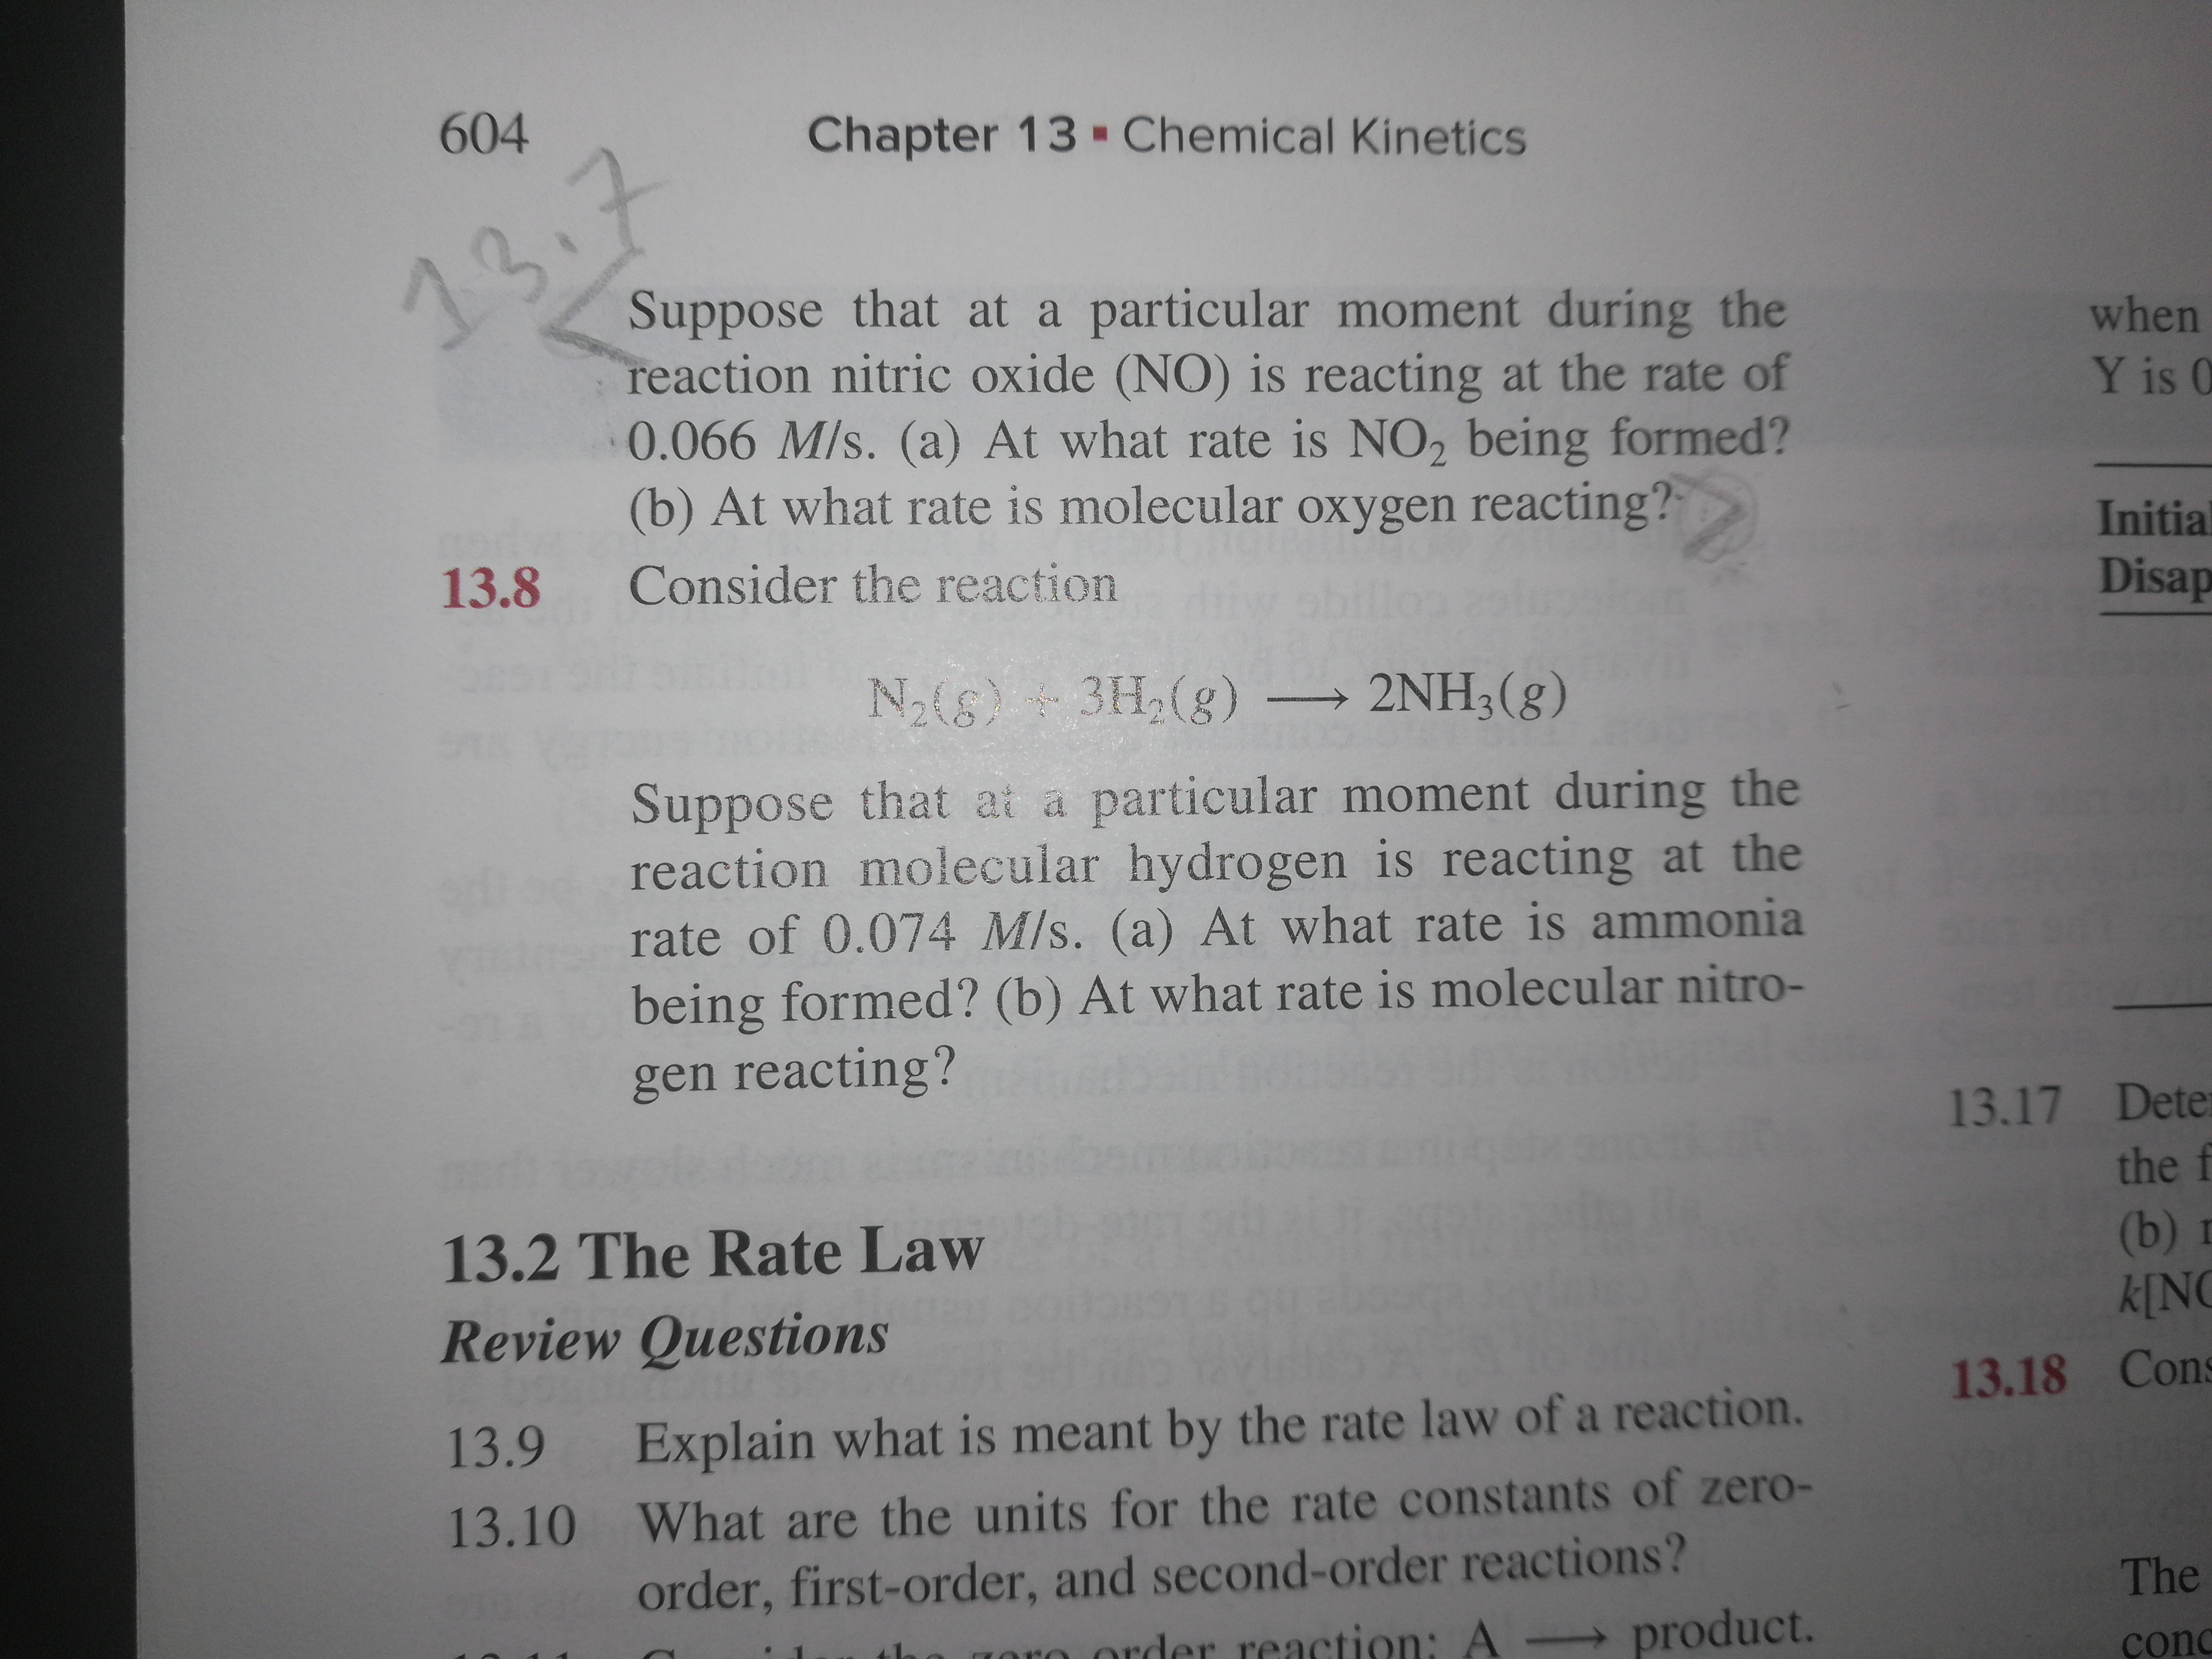 604
Chapter 13 - Chemical Kinetics
13.7
Suppose that at a particular moment during the
reaction nitric oxide (NO) is reacting at the rate of
0.066 M/s. (a) At what rate is NO, being formed?
(b) At what rate is molecular oxygen reacting?
when
Y is 0
Initial
13.8
Consider the reaction
Disap
N2(6)3H,(g) → 2NH3(g)
Suppose that at a particular moment during the
reaction molecular hydrogen is reacting at the
rate of 0.074 M/s. (a) At what rate is ammonia
being formed? (b) At what rate is molecular nitro-
gen reacting?
13.17 Dete
the f
13.2 The Rate Law
(b) г
k[NC
Review Questions
13.18 Cons
Explain what is meant by the rate law of a reaction.
13.9
13.10 What are the units for the rate constants of zero-
order, first-order, and second-order reactions?
- product.
The
tha goro order reaction: A
çonc
